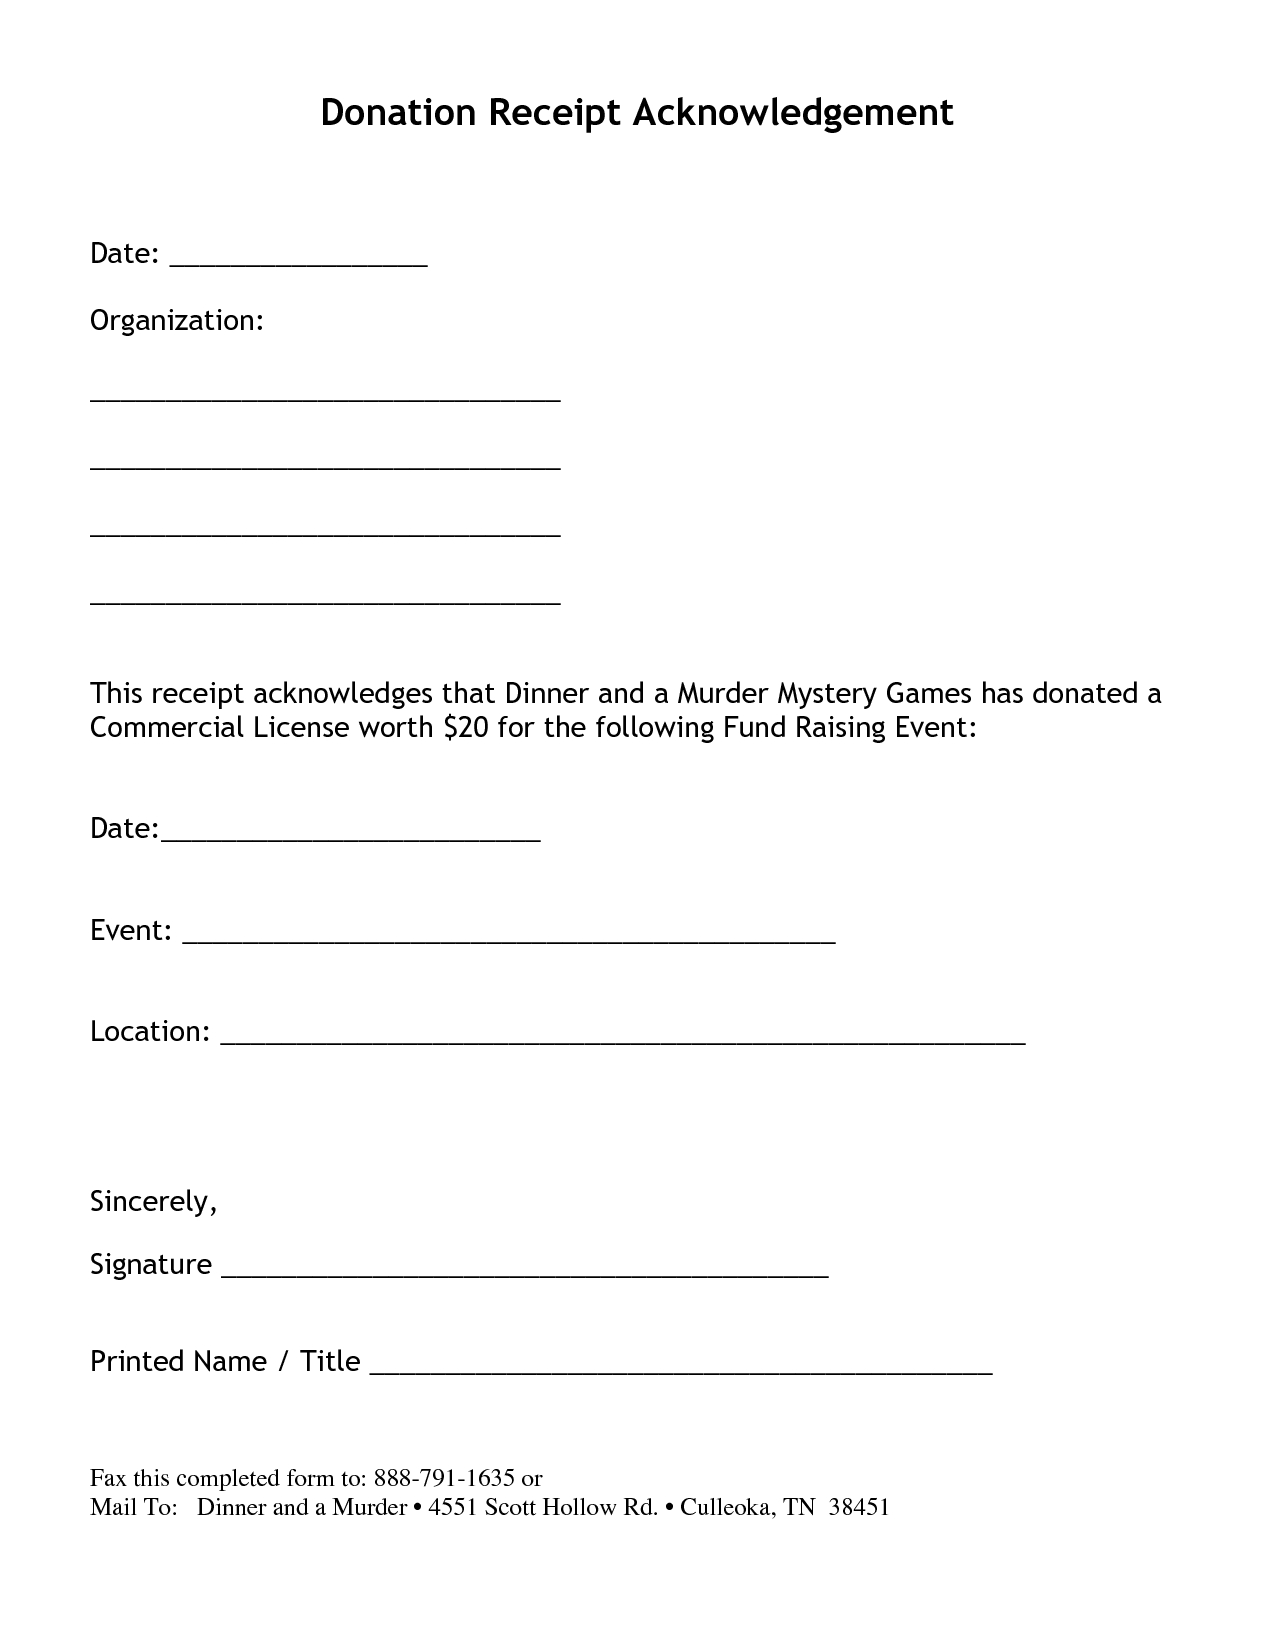 Non Profit Donation Receipt Letter | Things & Stuff Throughout Practical Completion Certificate Template Jct